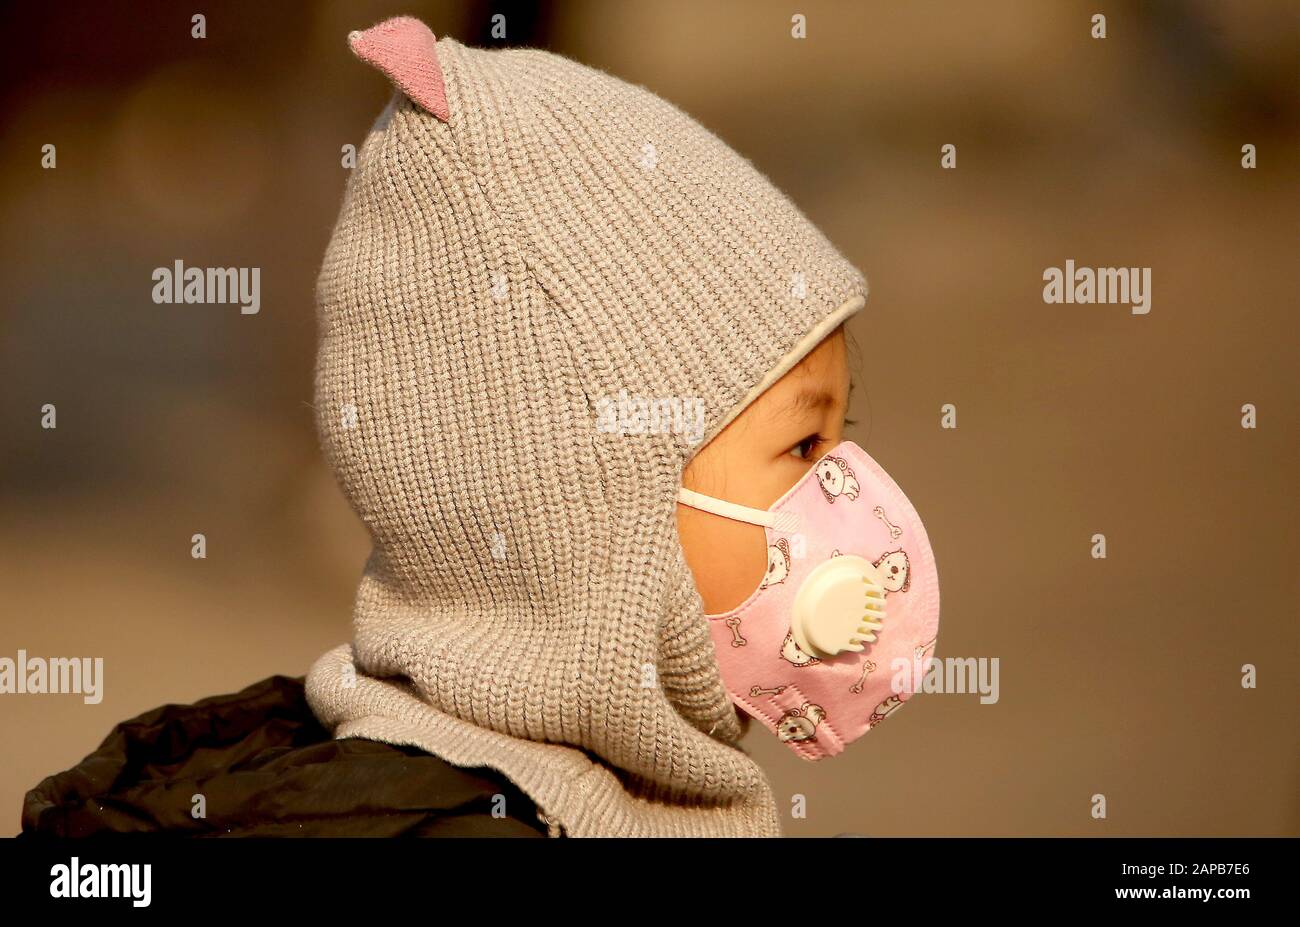 Beijing, China. 22nd Jan, 2020. Chinese wear protective respiratory masks in Beijing on Wednesday, January 22, 2020. Health authorities in China reported the country's sixth death from a new type of coronavirus, as the country braces for the Lunar New Year travel boom amid concerns over a possible outbreak similar to that of the SARS virus in the early 2000s. Photo by Stephen Shaver/UPI Credit: UPI/Alamy Live News Stock Photo